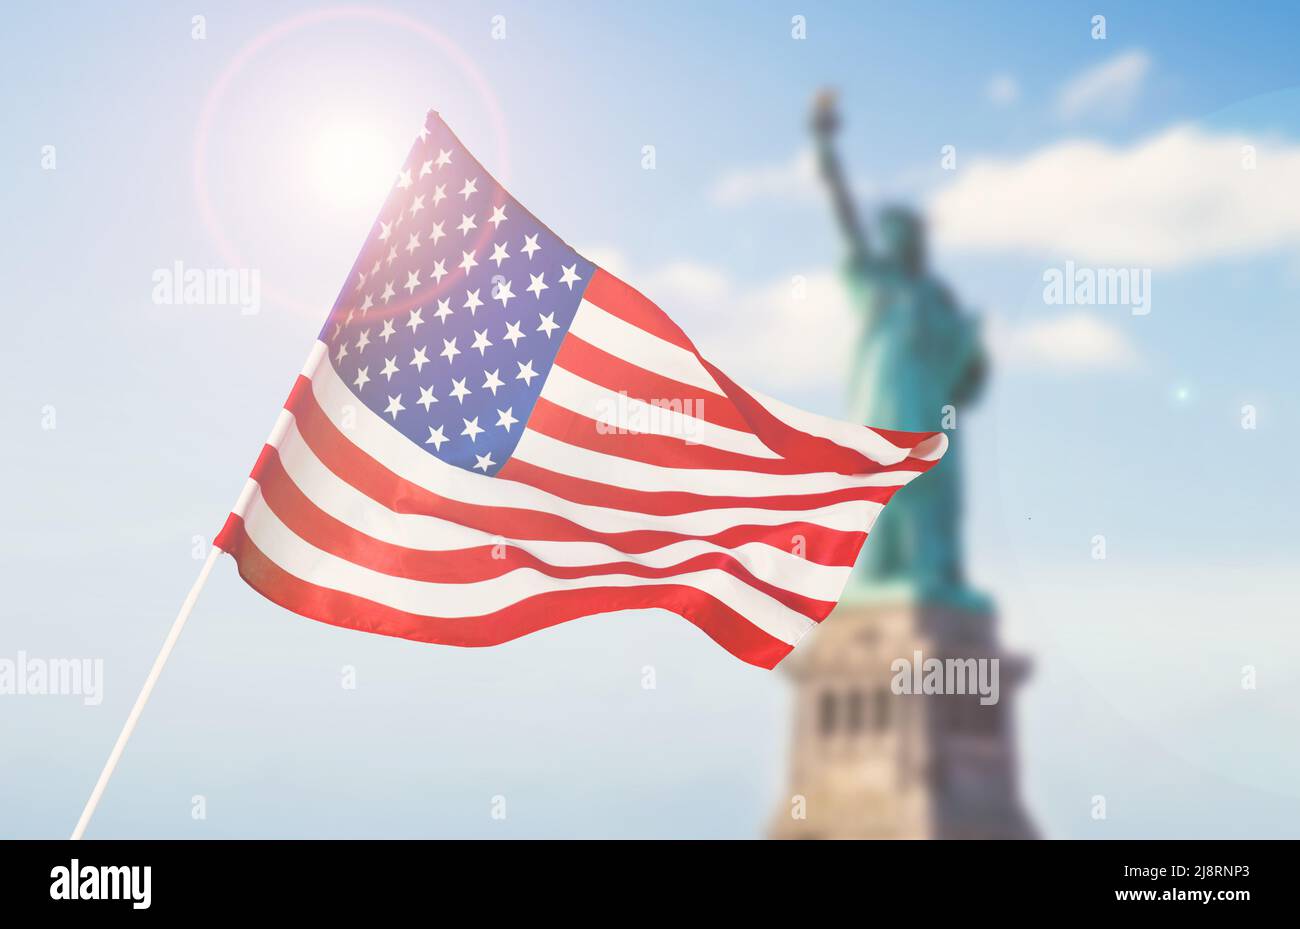 American flag on blurred statue of liberty background for Memorial Day, 4th of July, Labour Day, Presidents Day, Independence Day. Stock Photo